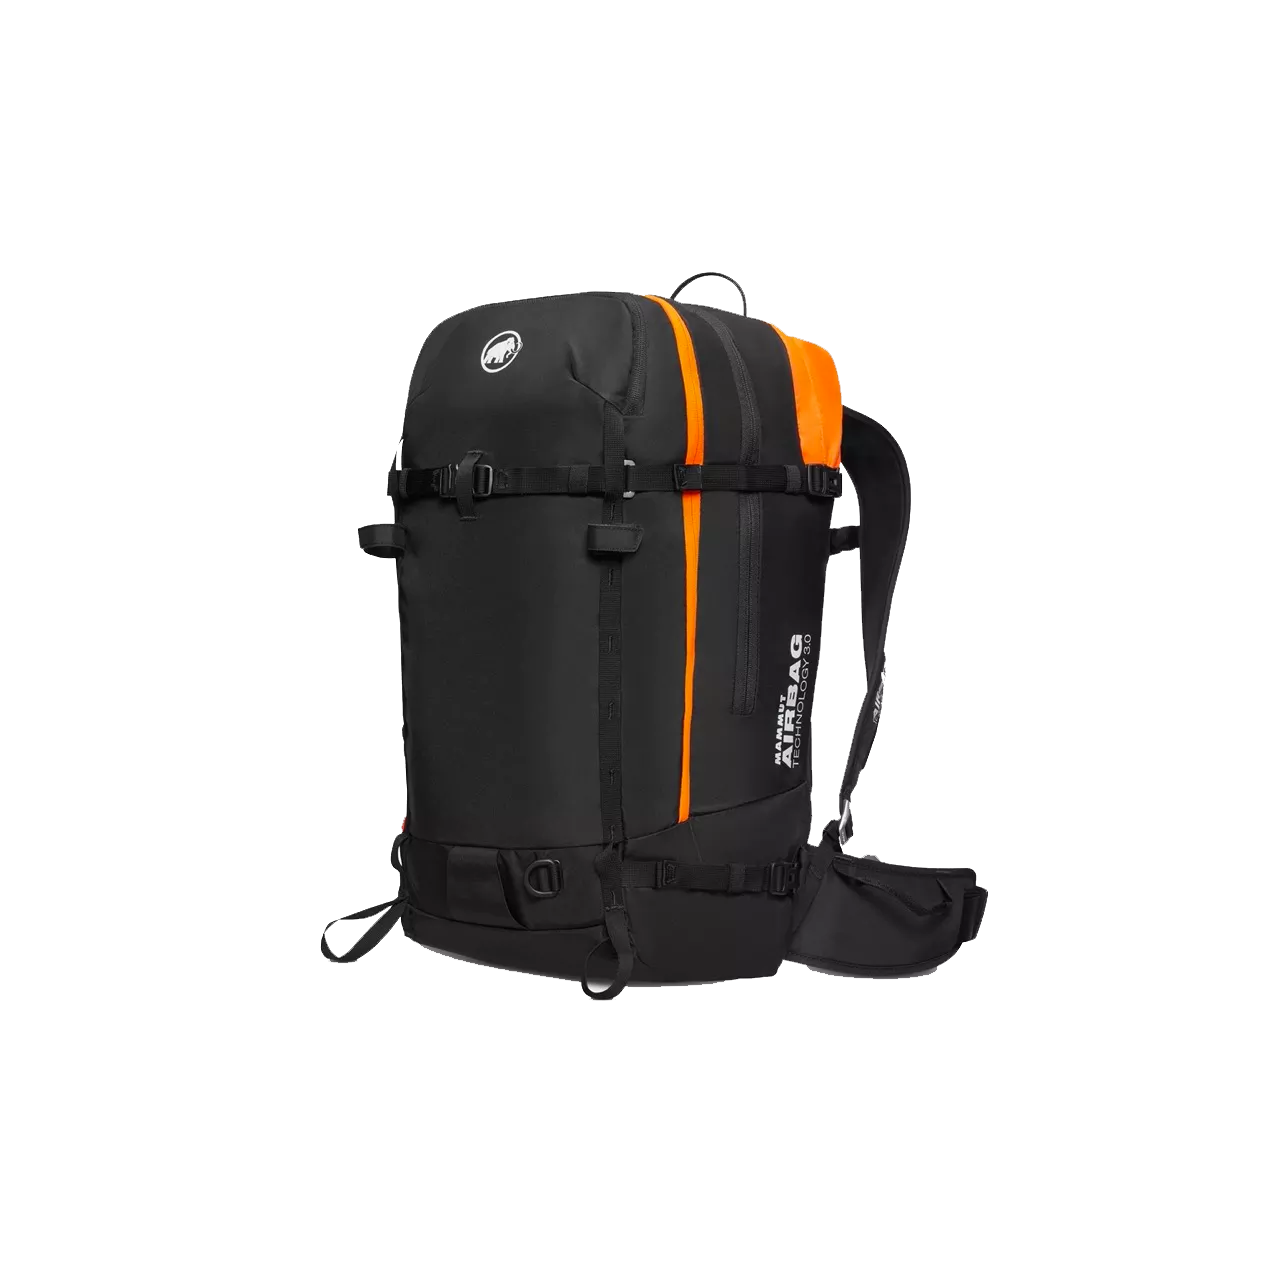 Mammut Pro 35 Removable Airbag 3.0 - Avalanche airbag backpack